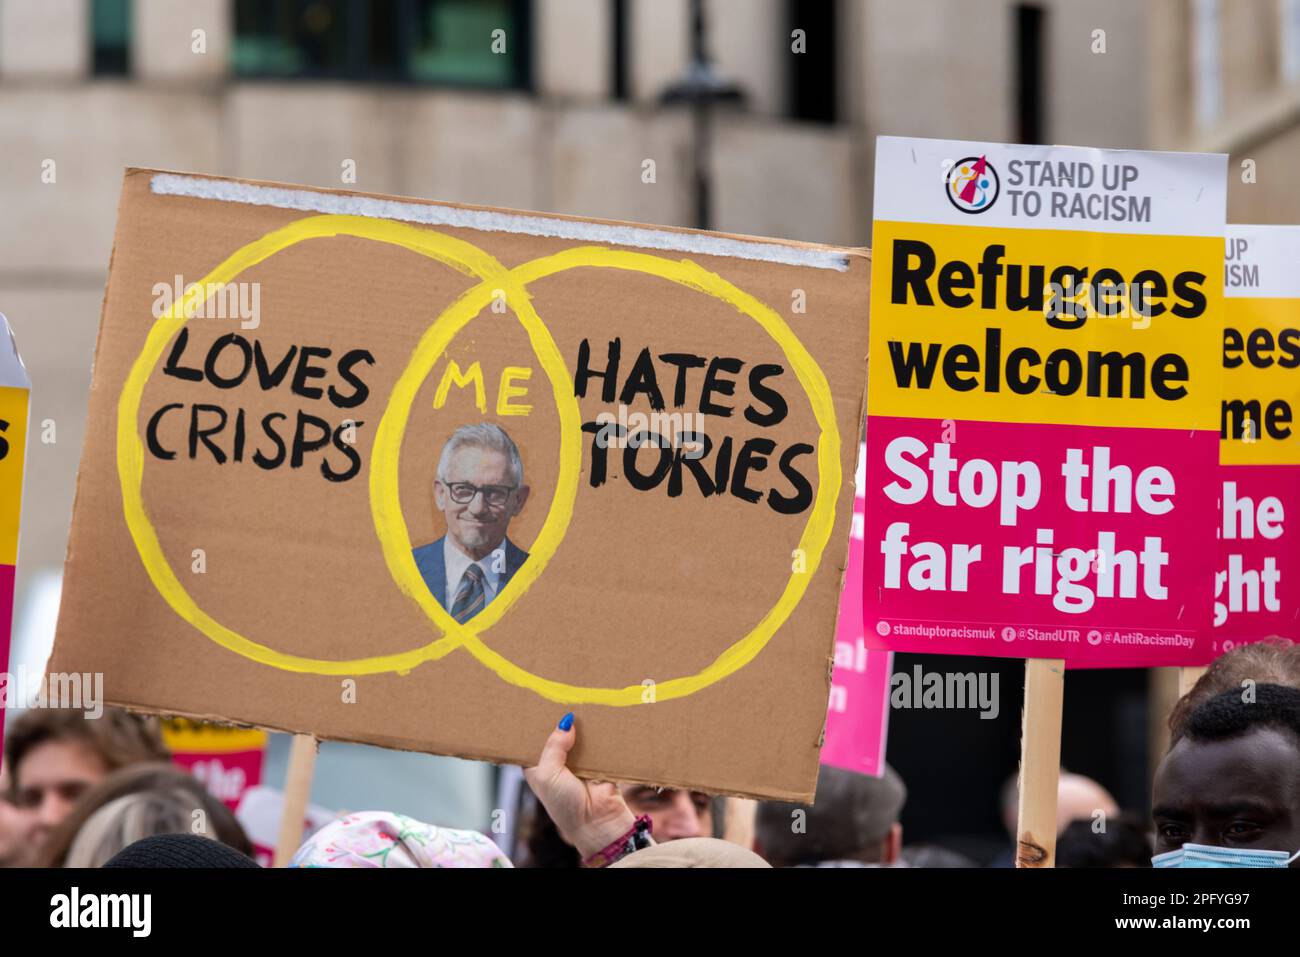 Protest taking place in London on UN Anti Racism Day. Stand up to Racism. Gary Lineker Venn diagram placard. Refugees welcome Stock Photo